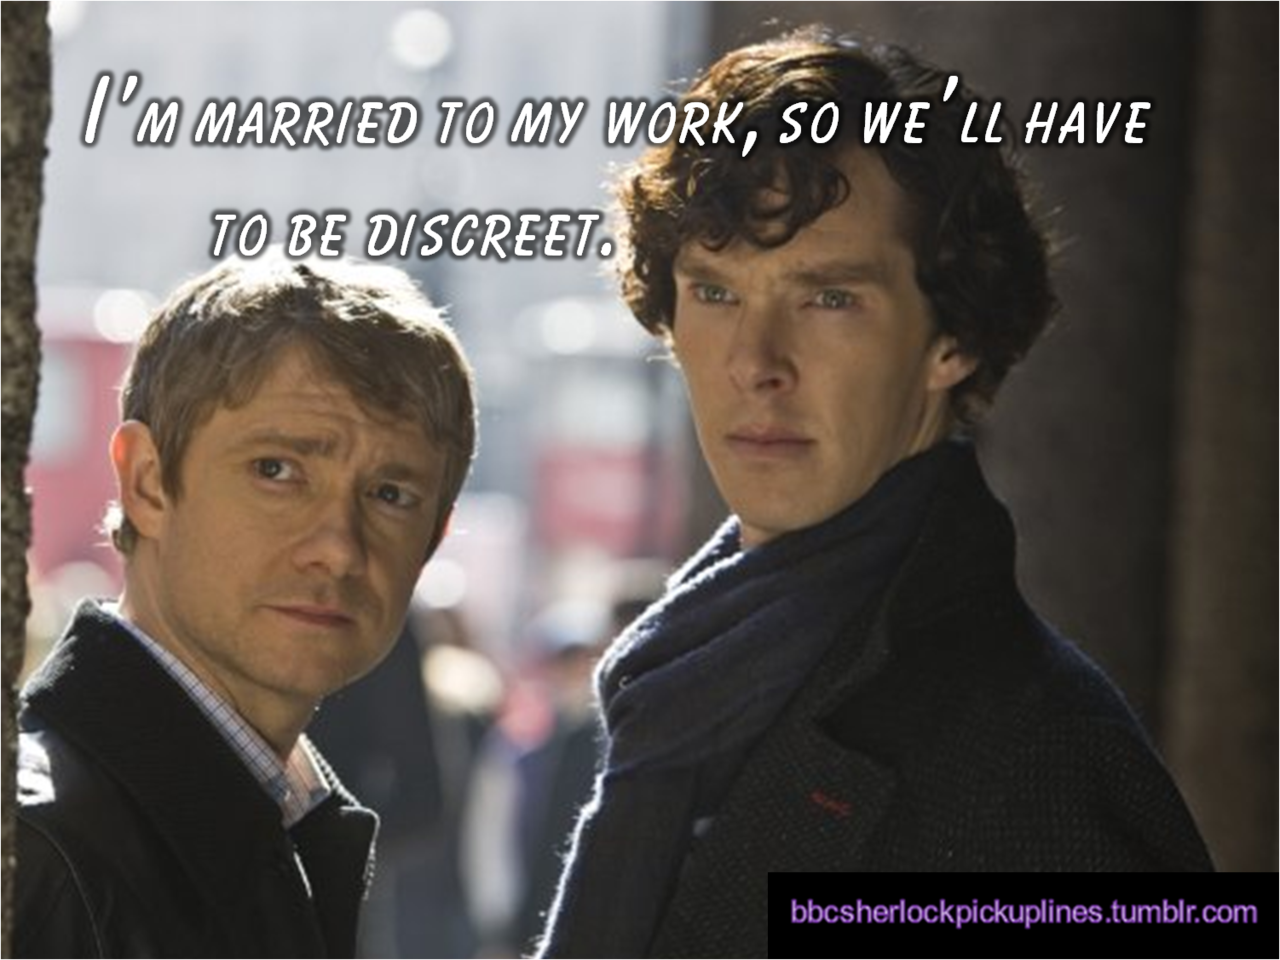 The best of series one references, from BBC Sherlock pick-up lines.